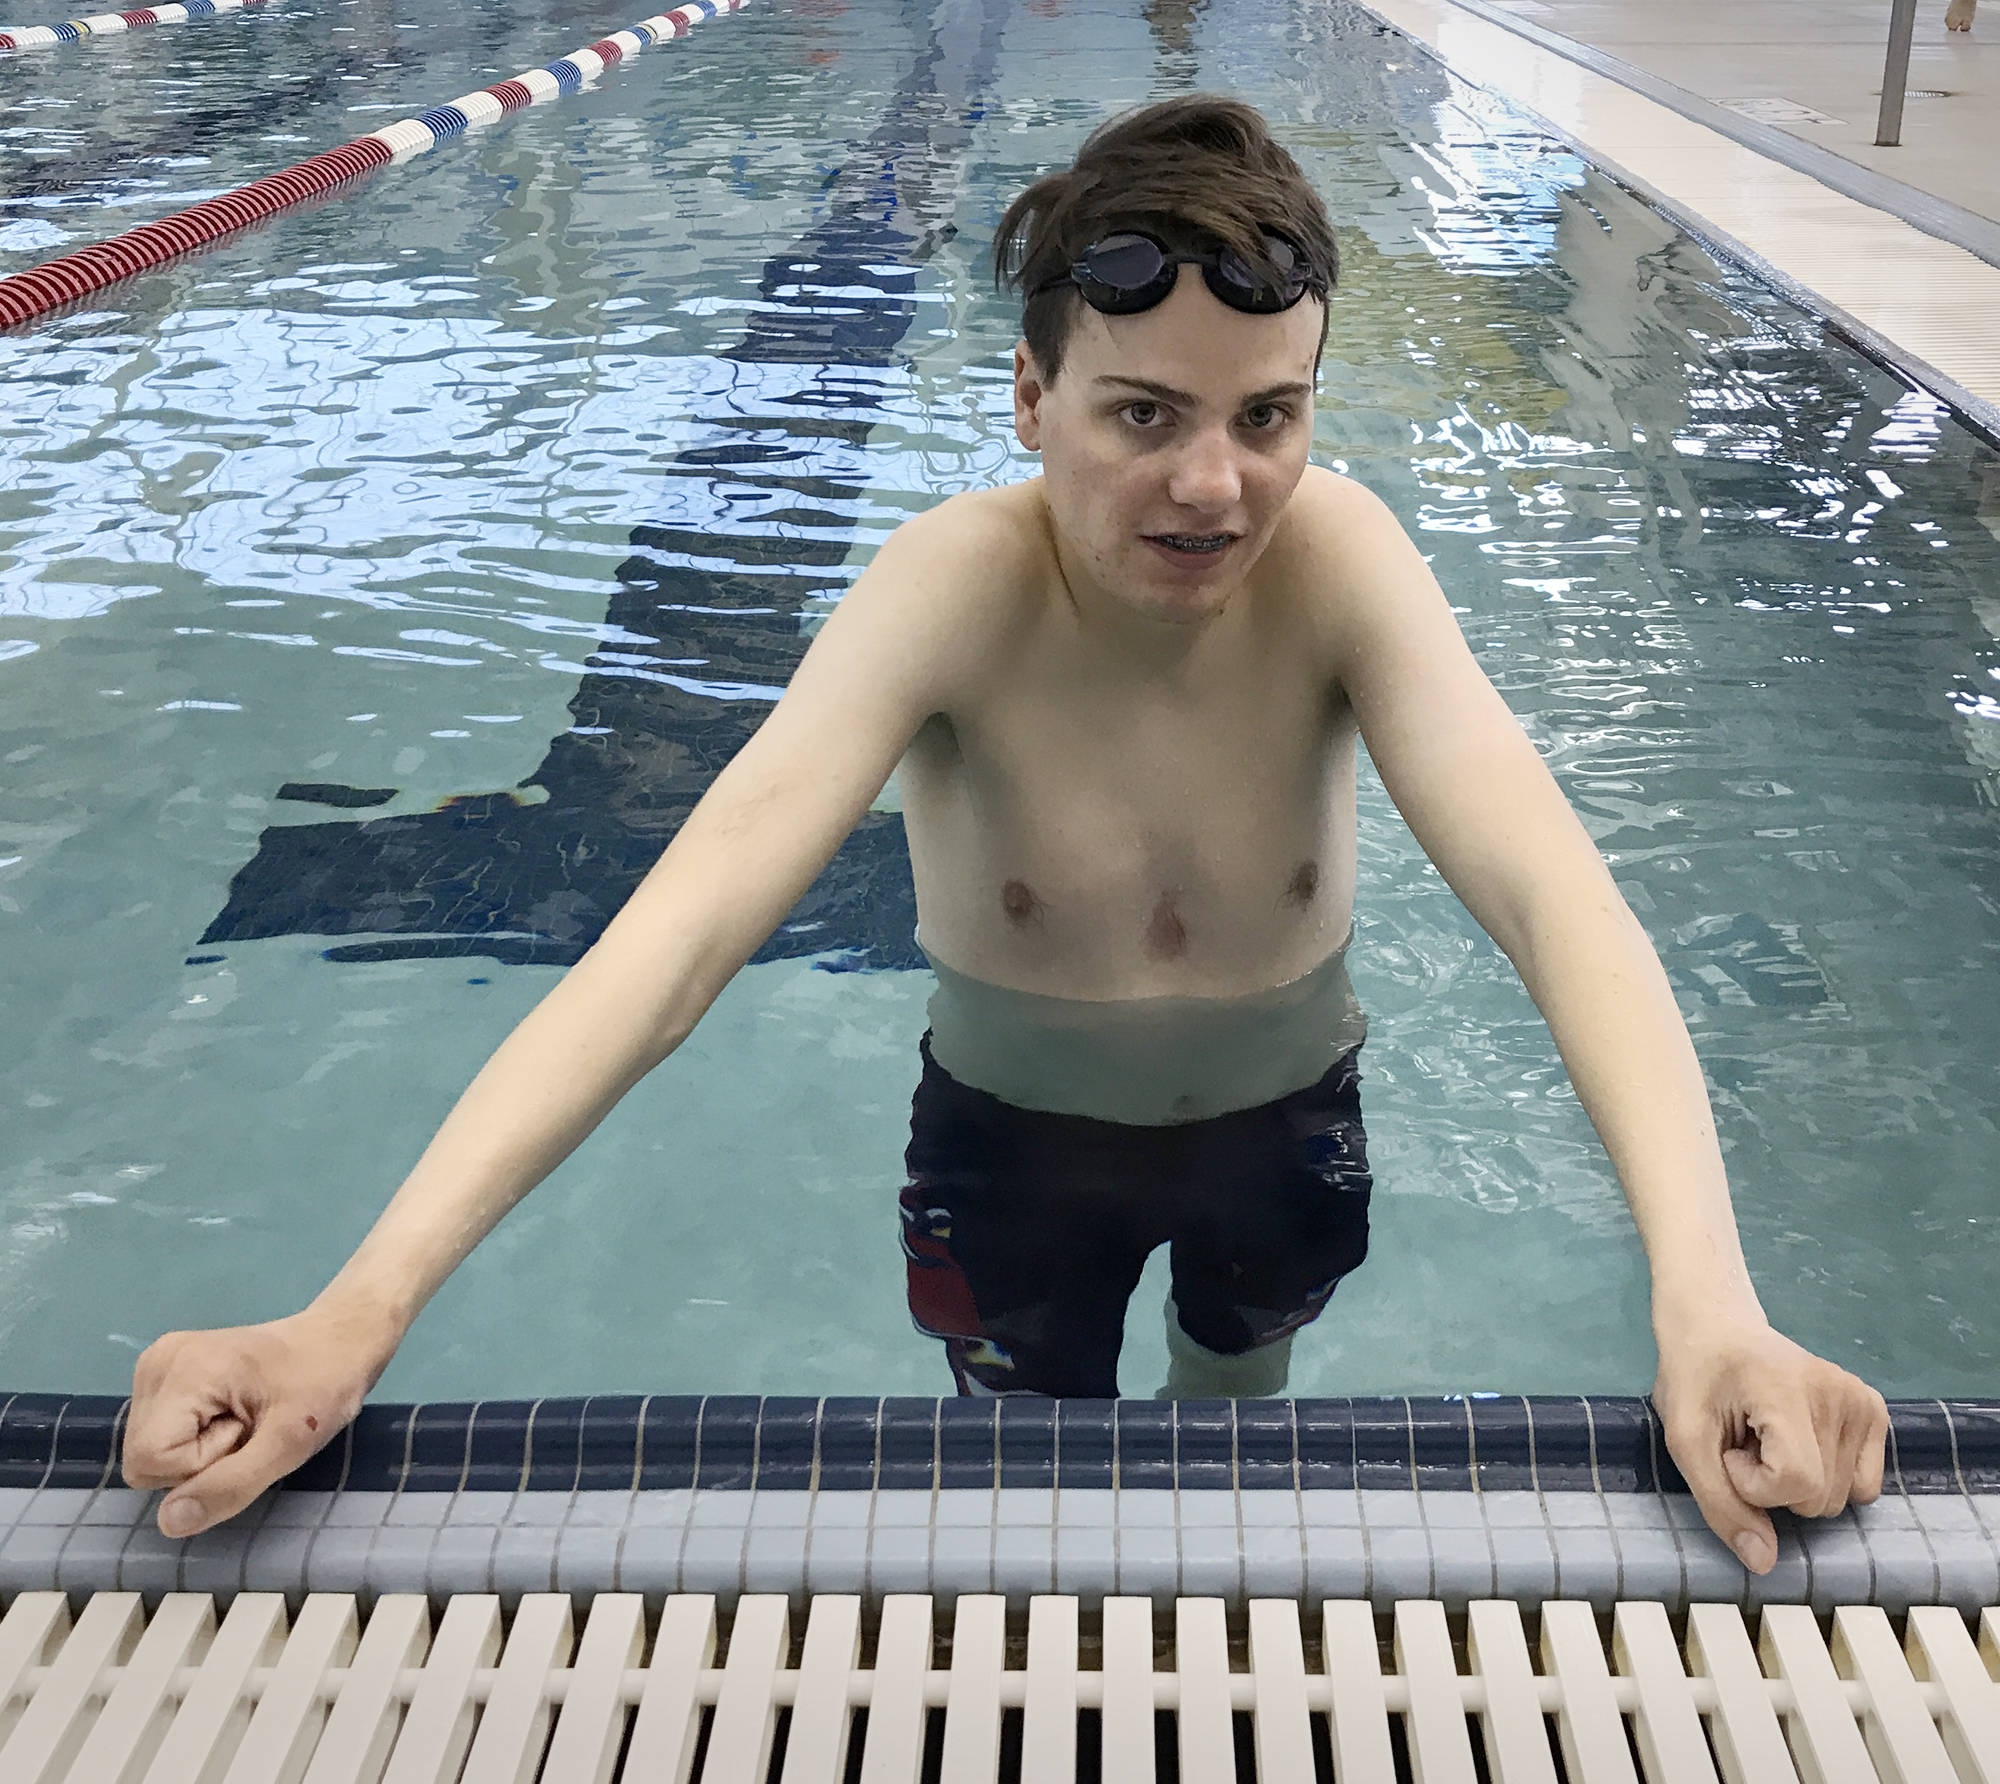 Nolan Harvey trains at the Dimond Park Aquatic Center on Tuesday. Harvey is just one of two swimmers on Team Alaska competing in the Special Olympics USA Games in Seattle next week. (Michael Penn | Juneau Empire)